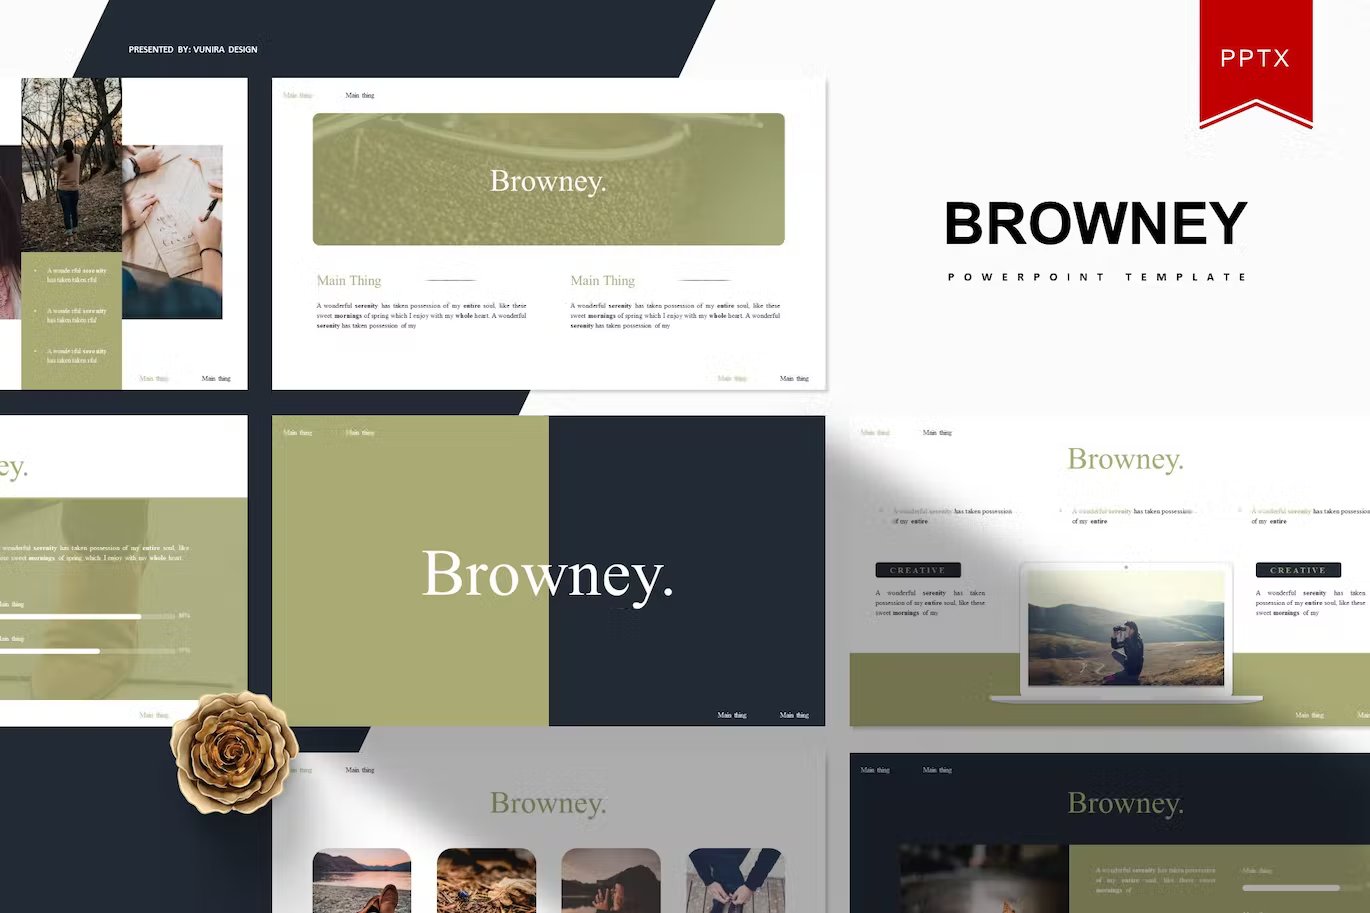 Black lettering "Browney Powerpoint Template" and different templates on a gray background.